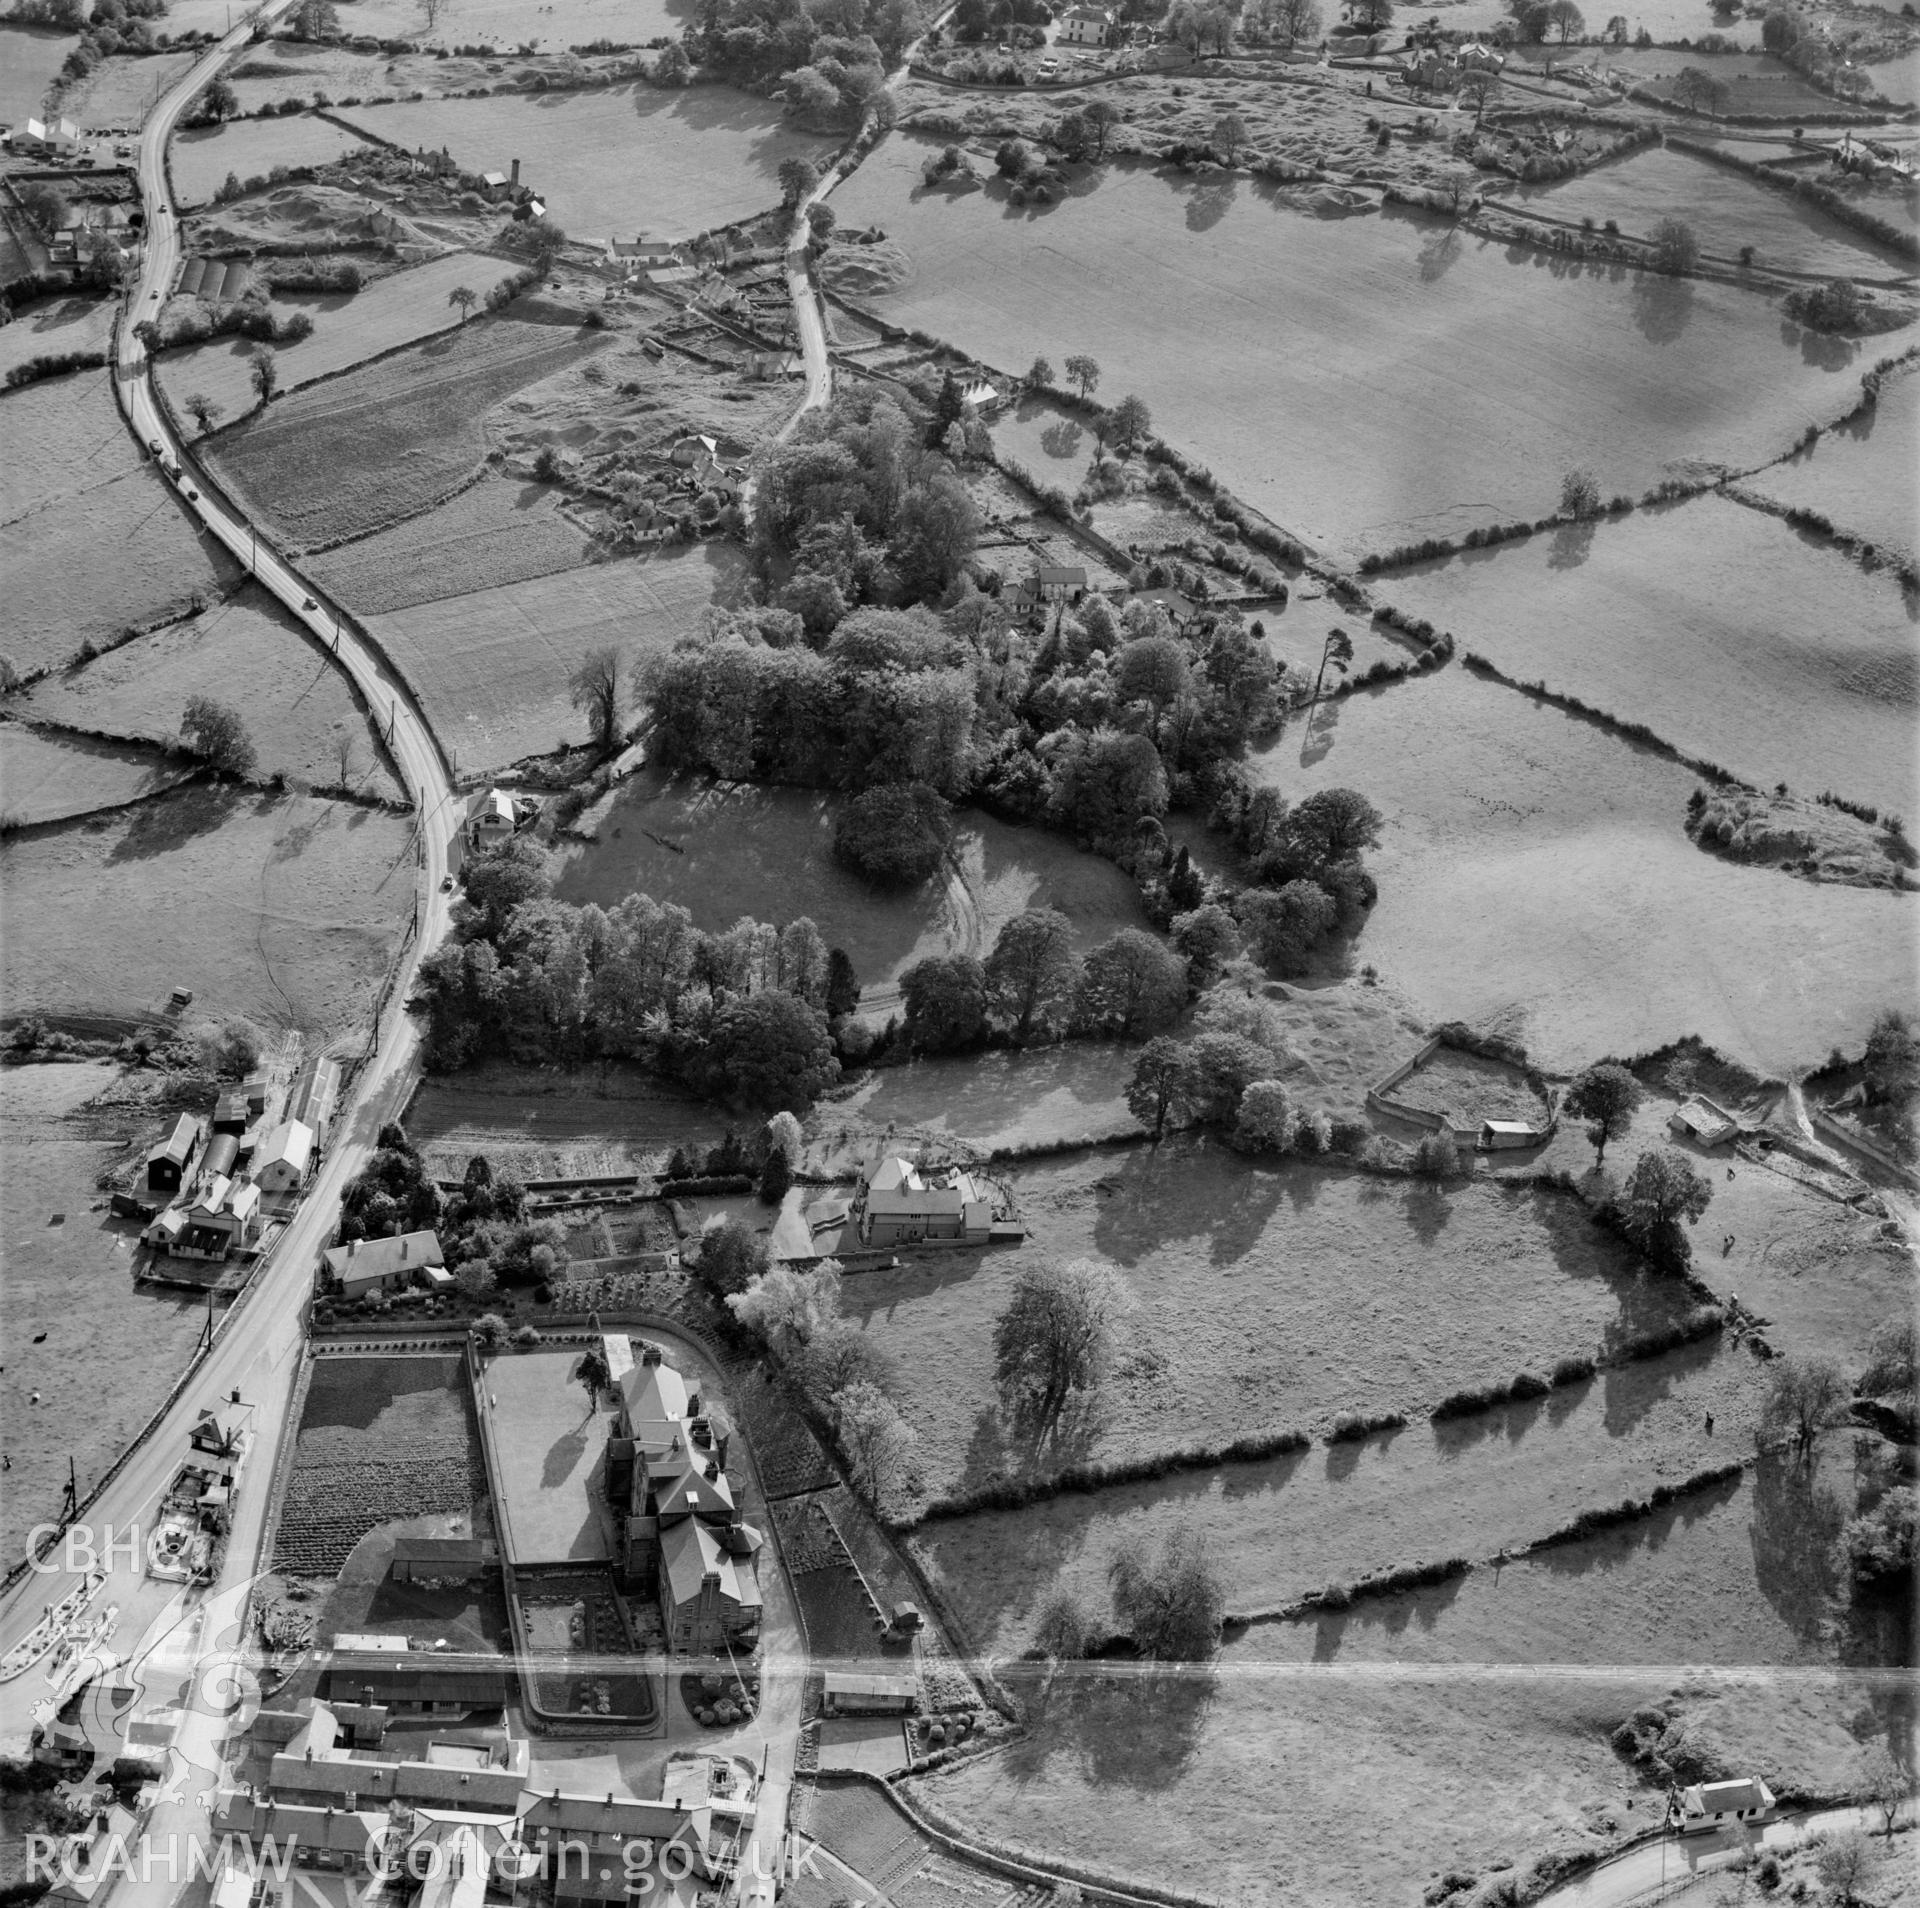 View of area south of Holywell showing Halkyn Road, Stamford Dairy and Lluesty Hospital. Labelled "Holywell Textile Mills Ltd., Highfield & Pistyll".